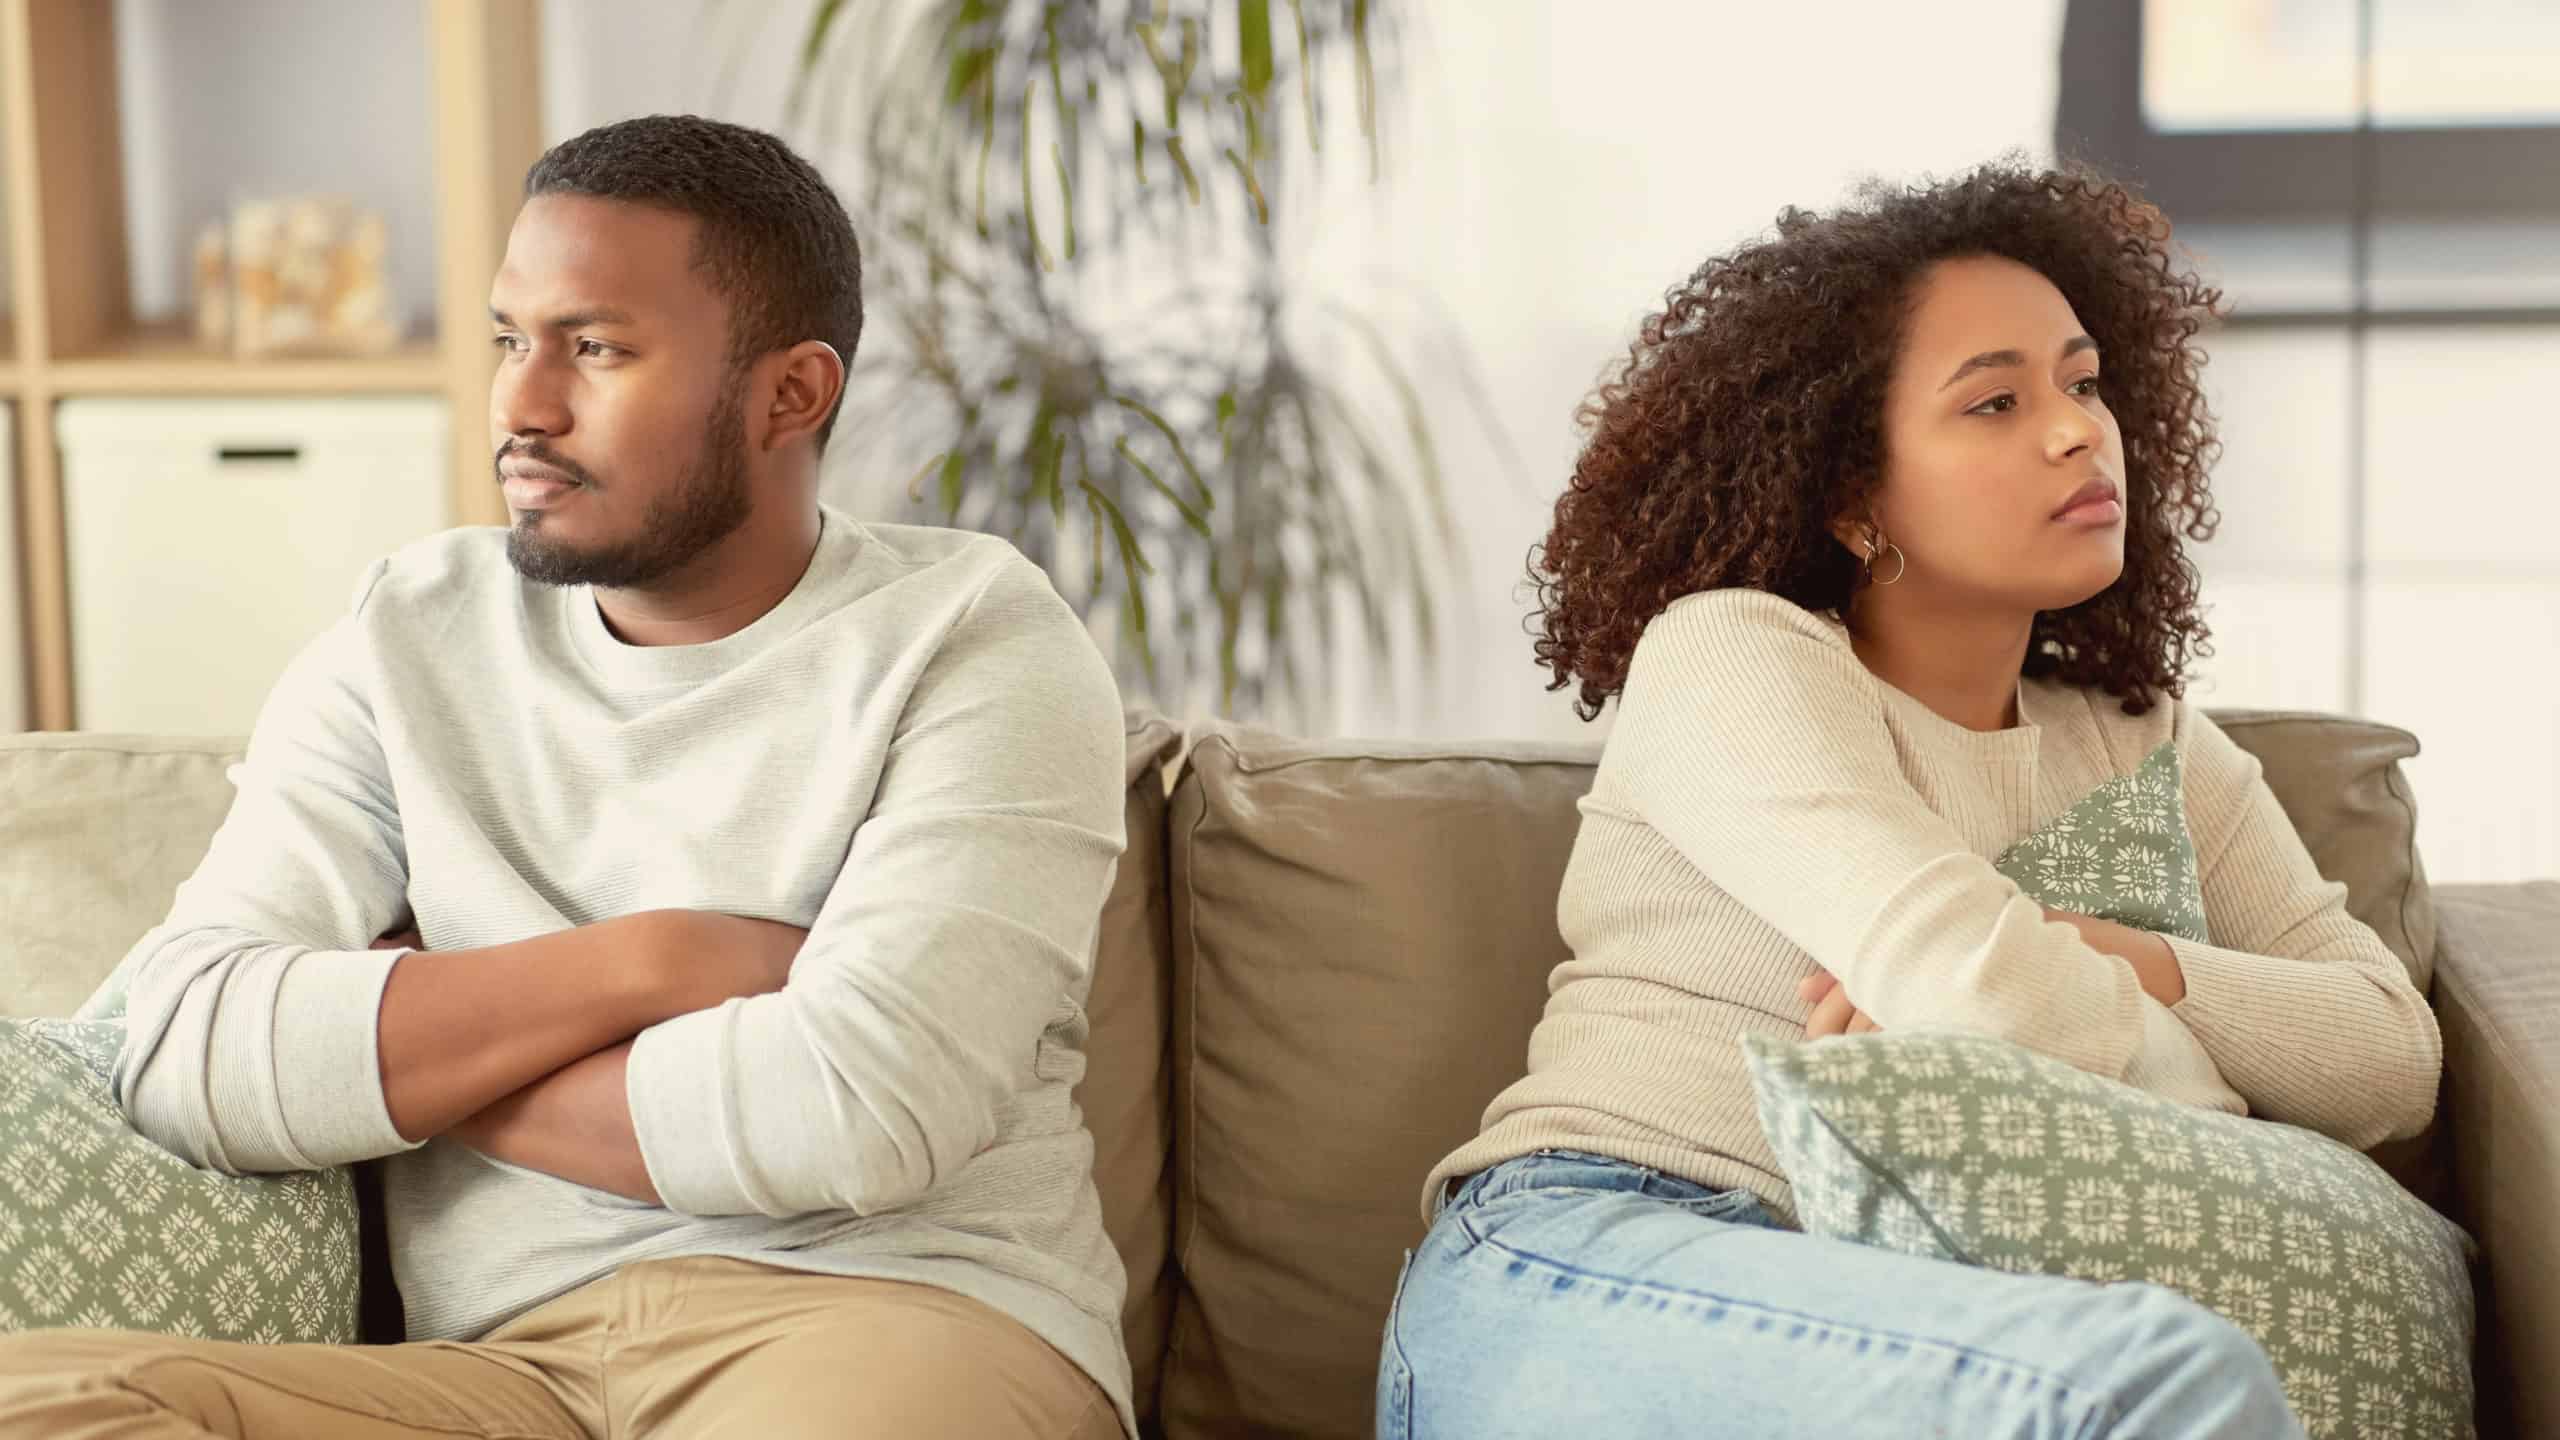 Spouse Training 3 - Is Divorce the Right Answer? 15 Questions Couples Should Ask - Focus on the  Family